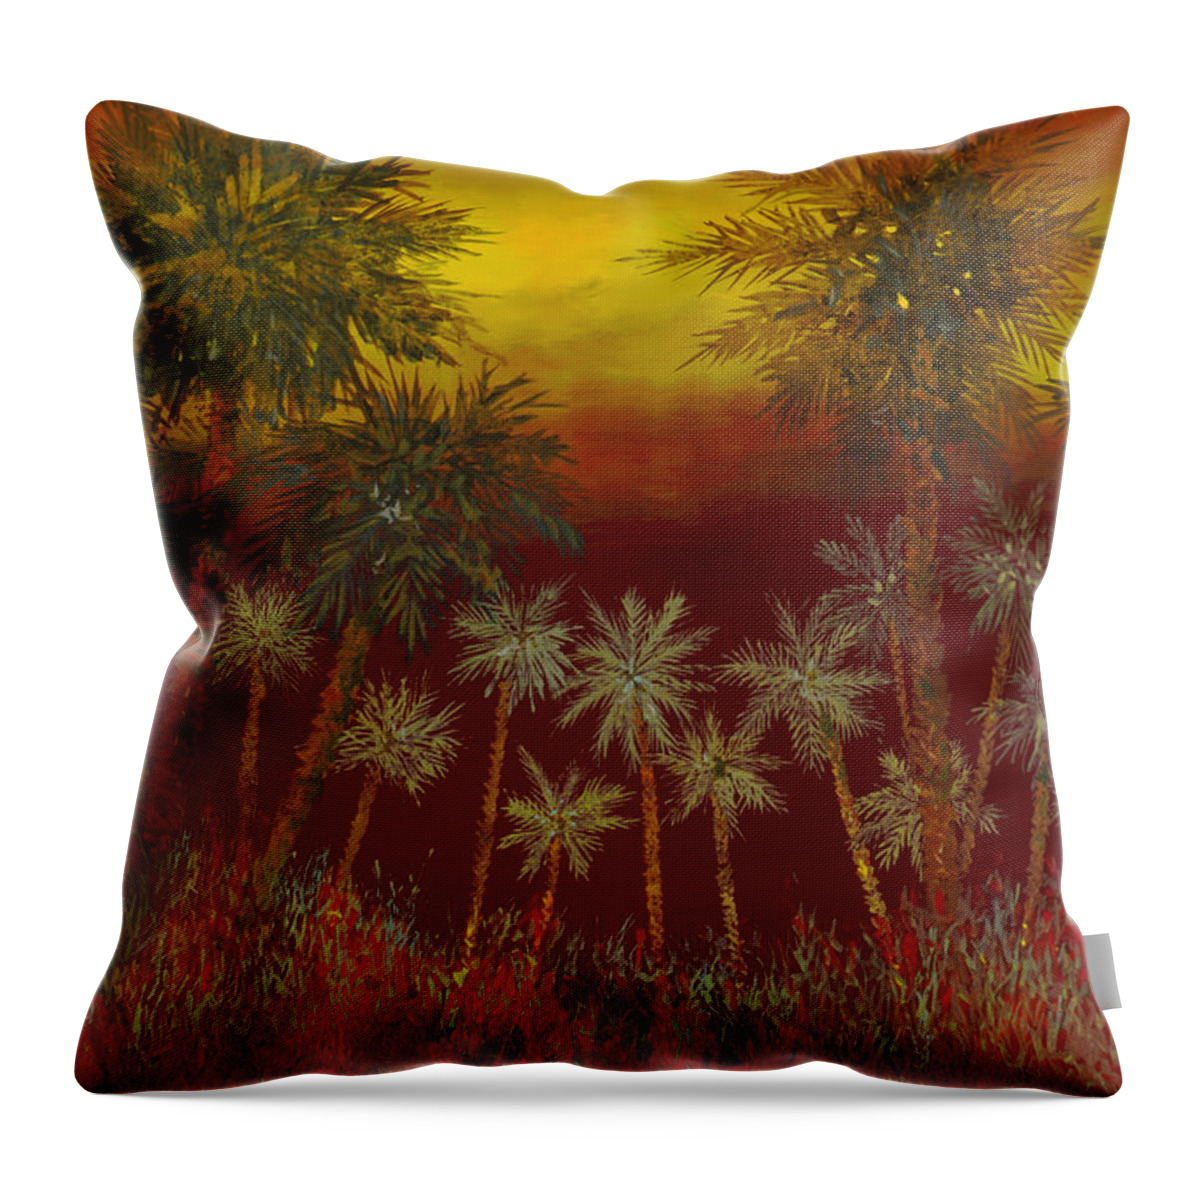 Jungle Throw Pillow featuring the painting La Jungla Rossa by Guido Borelli